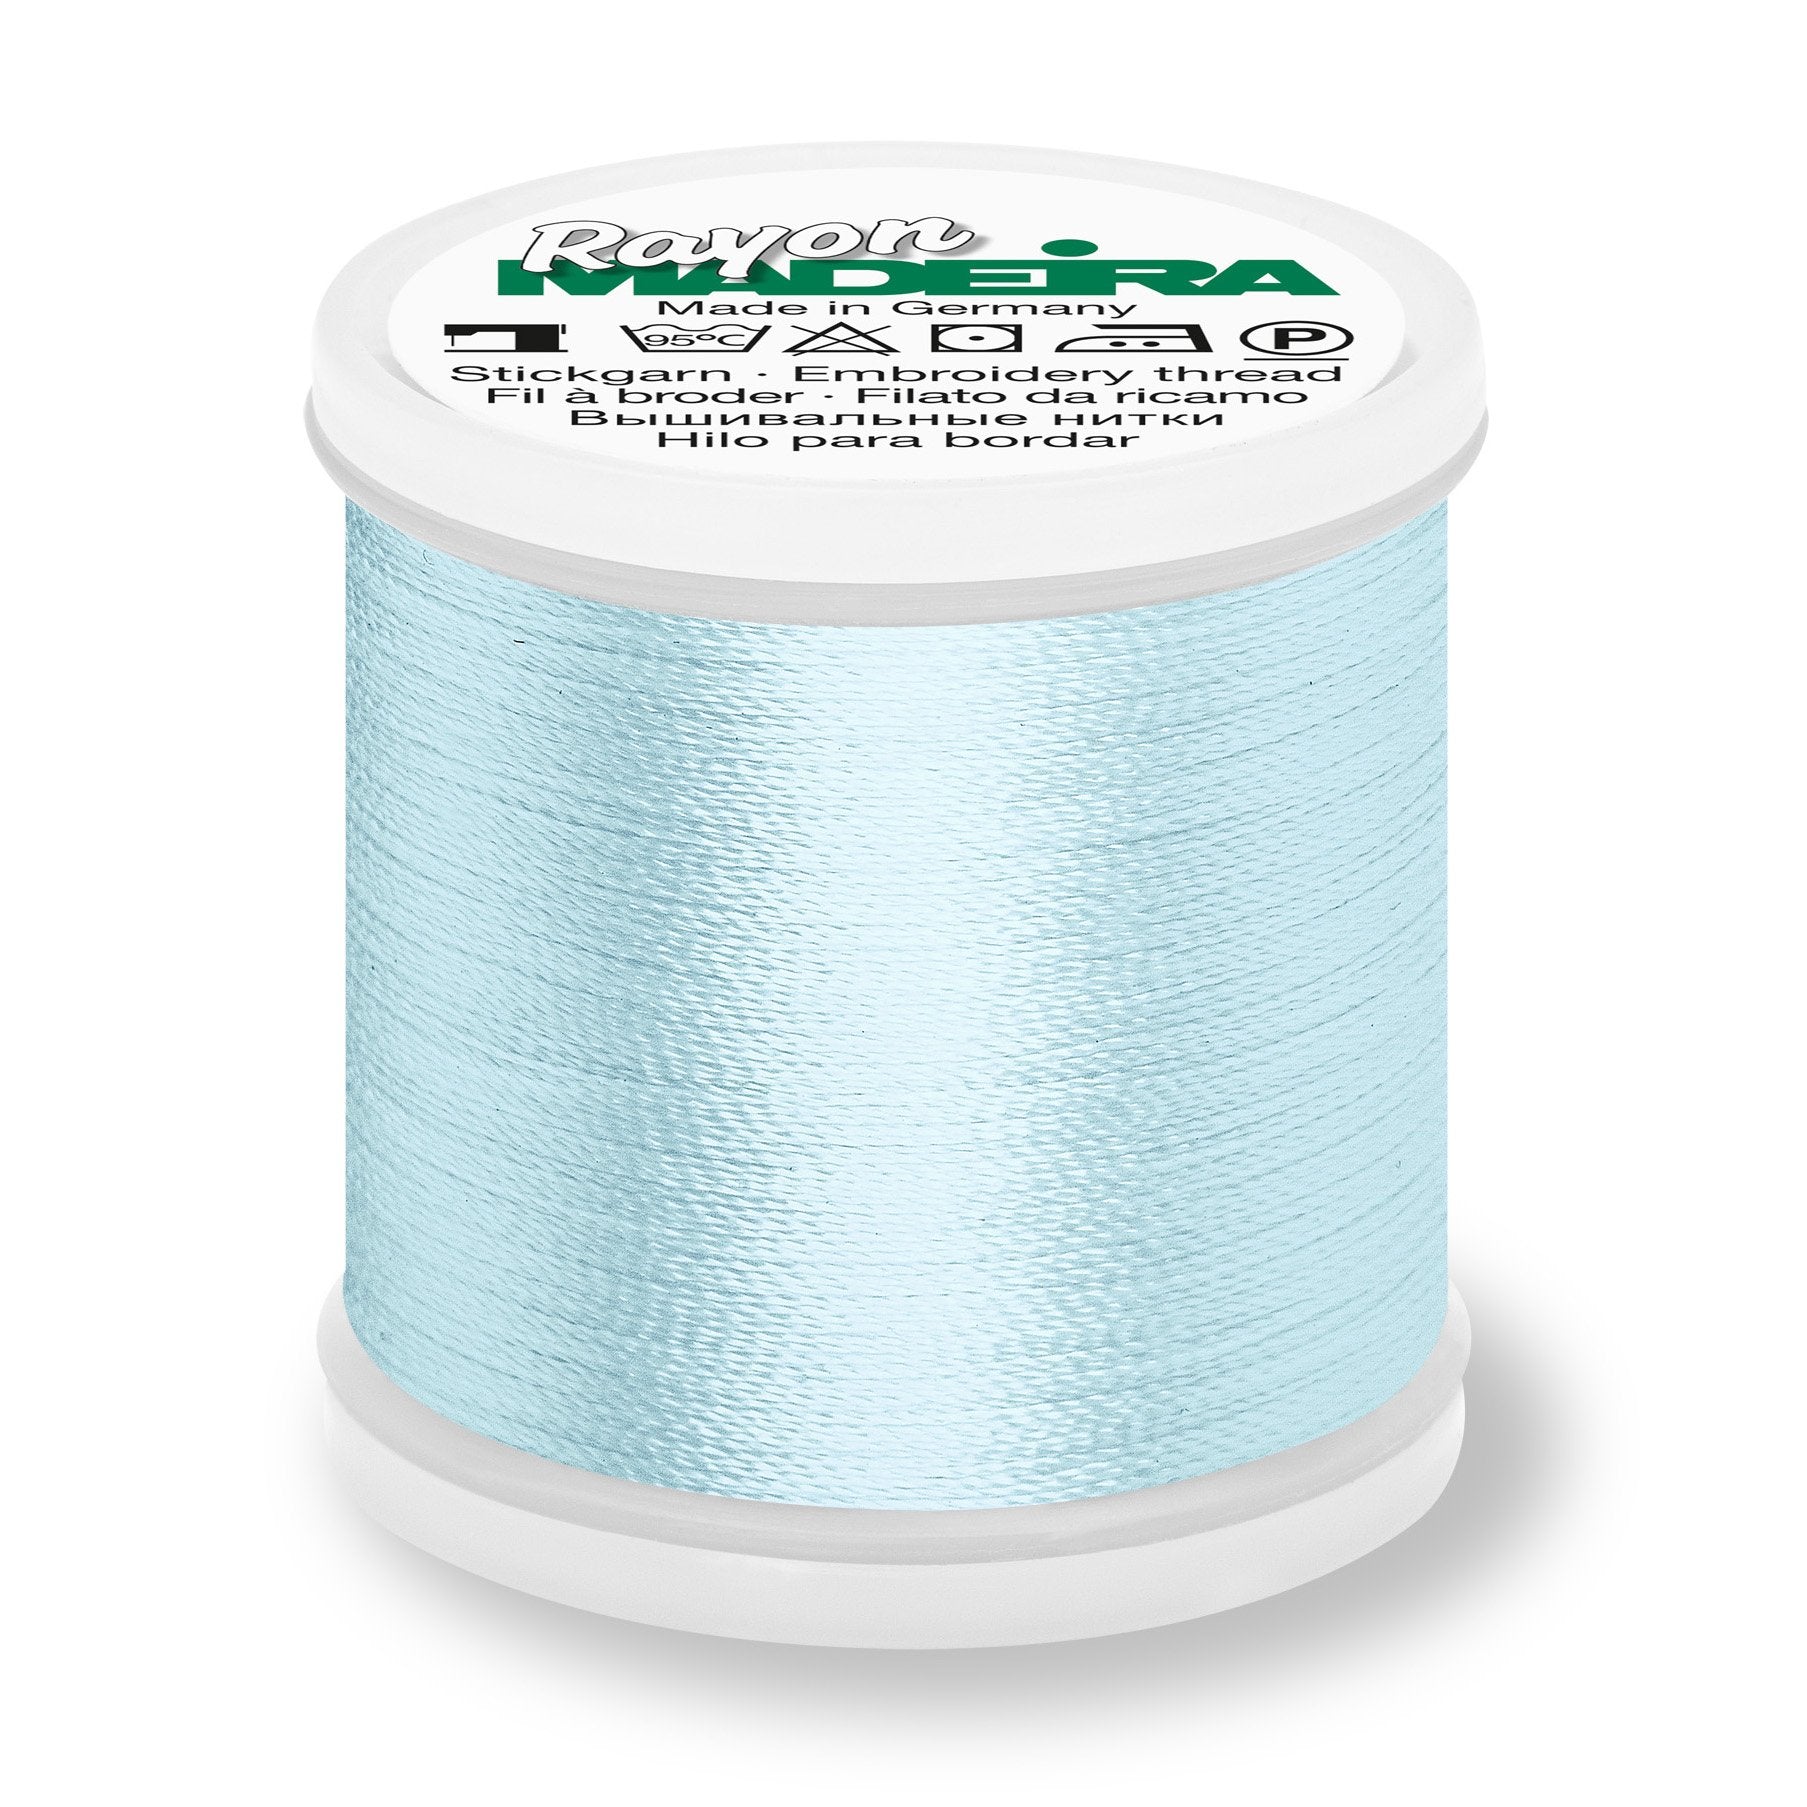 Madeira Rayon 40 Embroidery Thread 200m #1074 Light Blue from Jaycotts Sewing Supplies